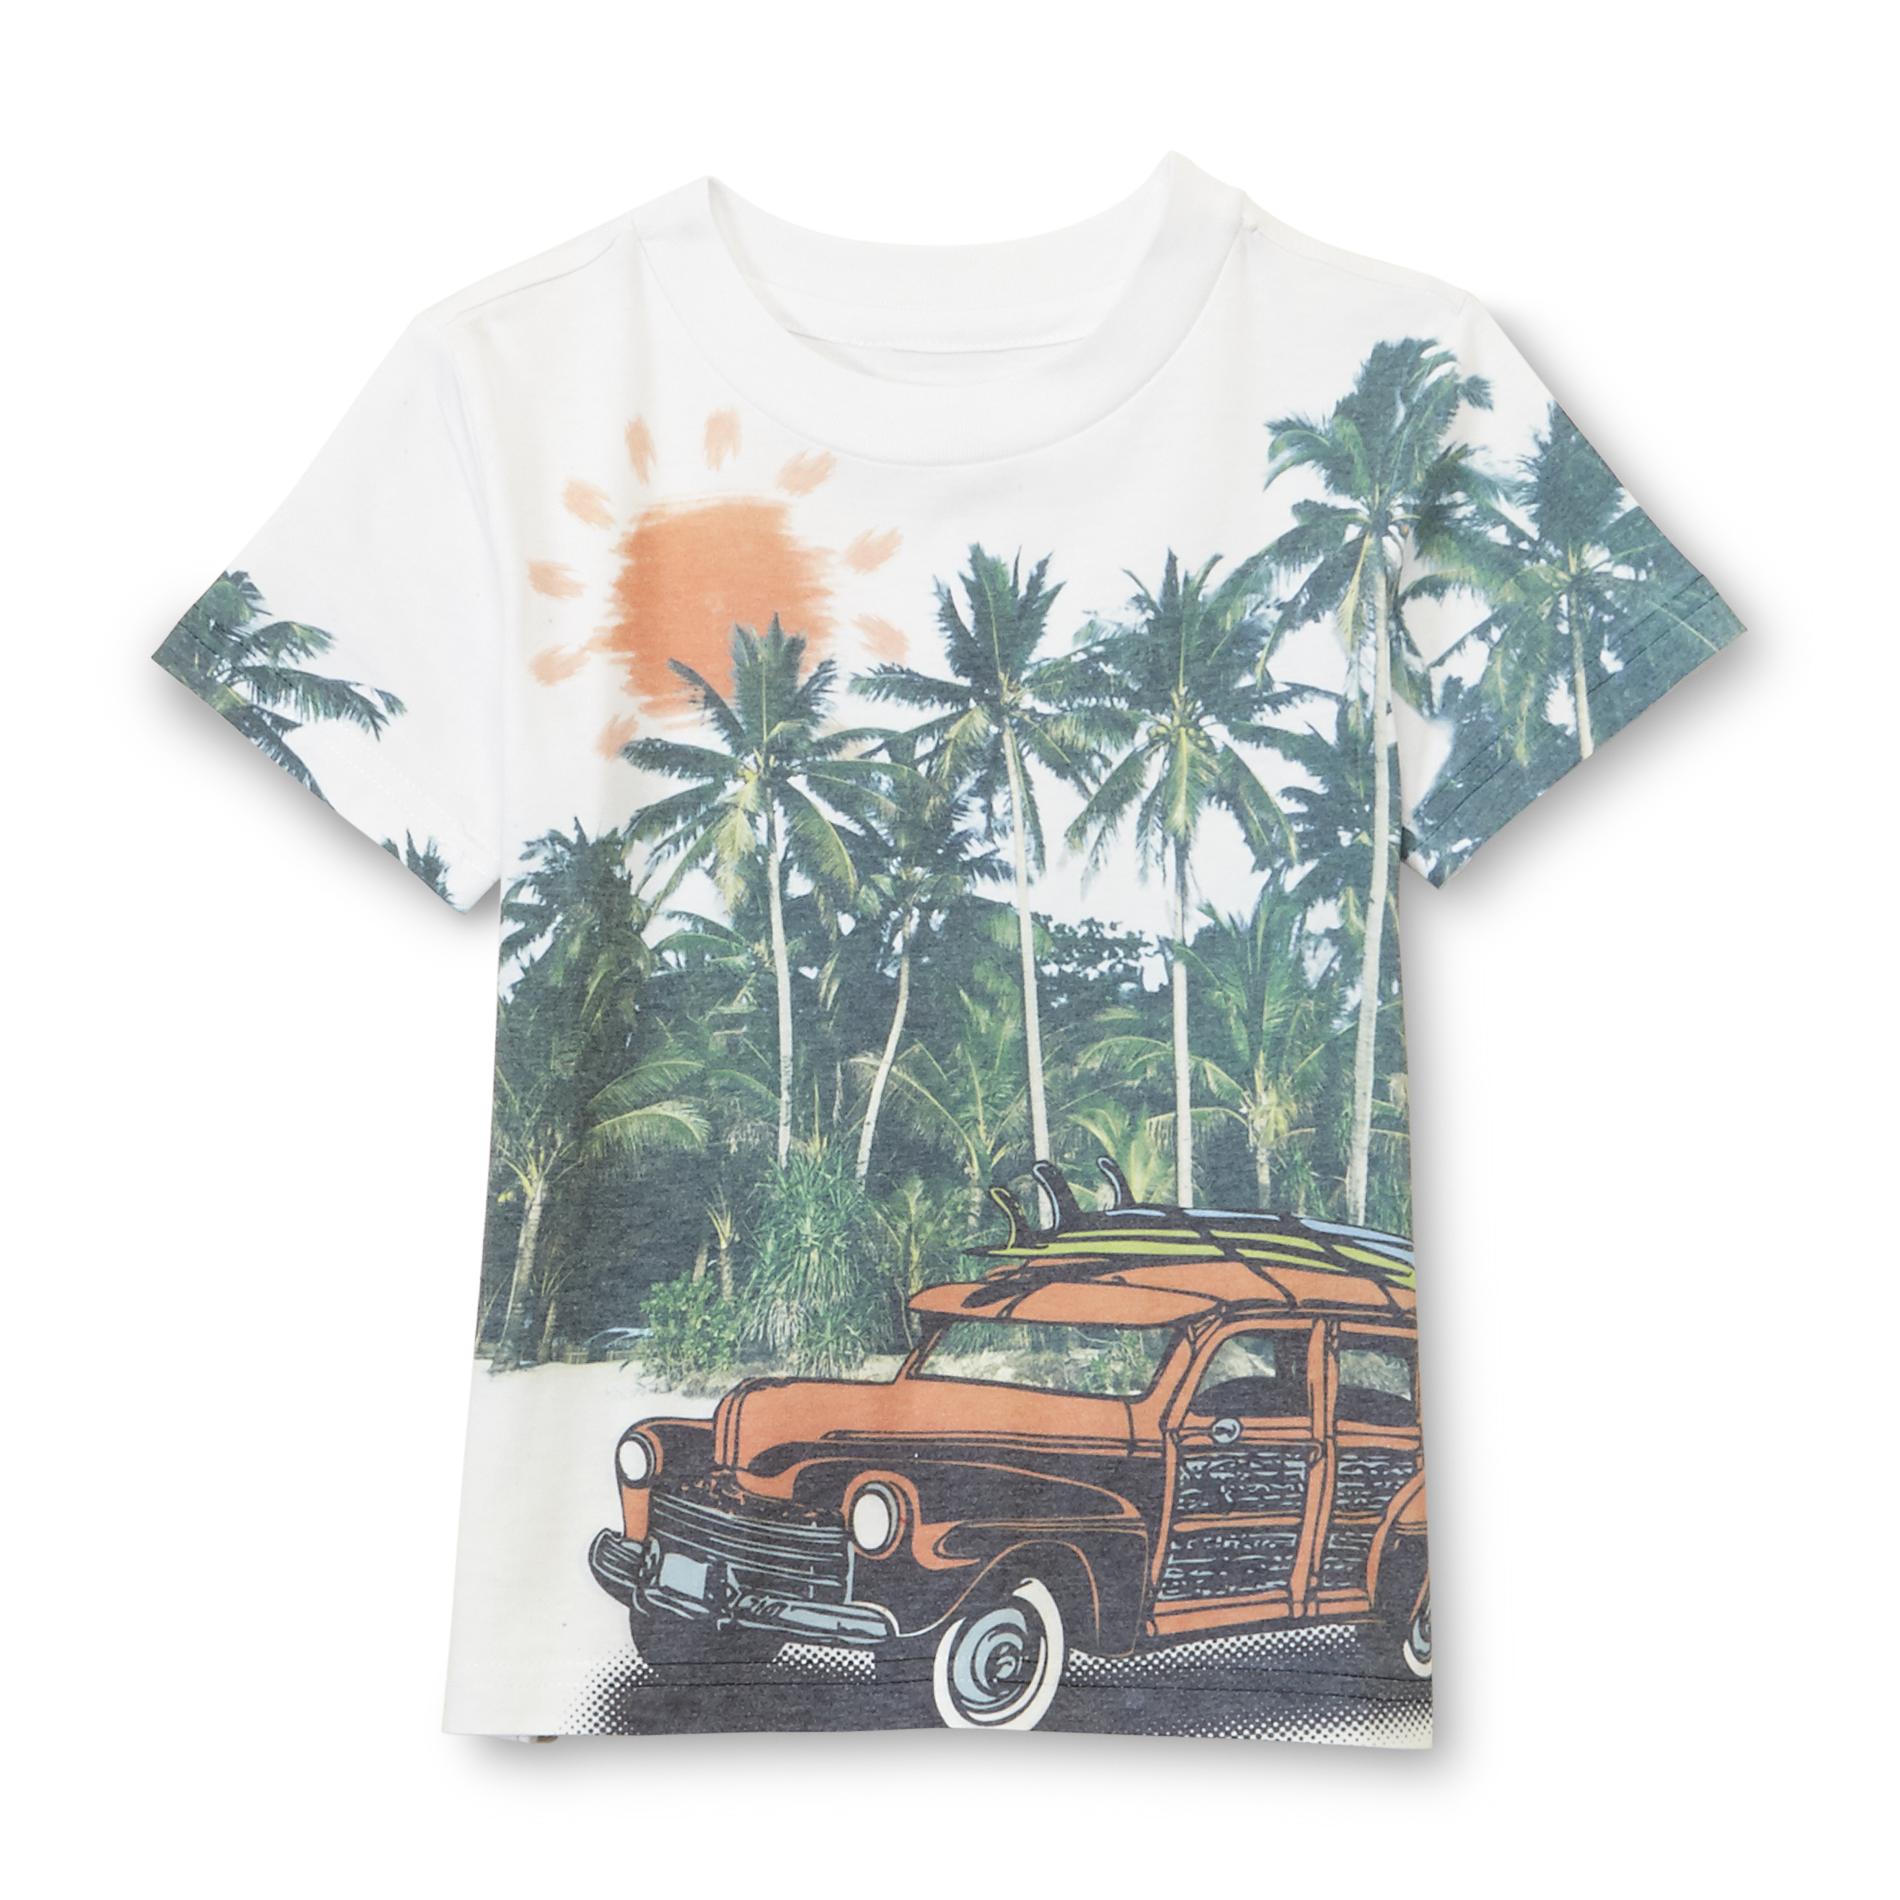 Route 66 Baby Infant & Toddler Boy's Graphic T-Shirt - Tropical Surf